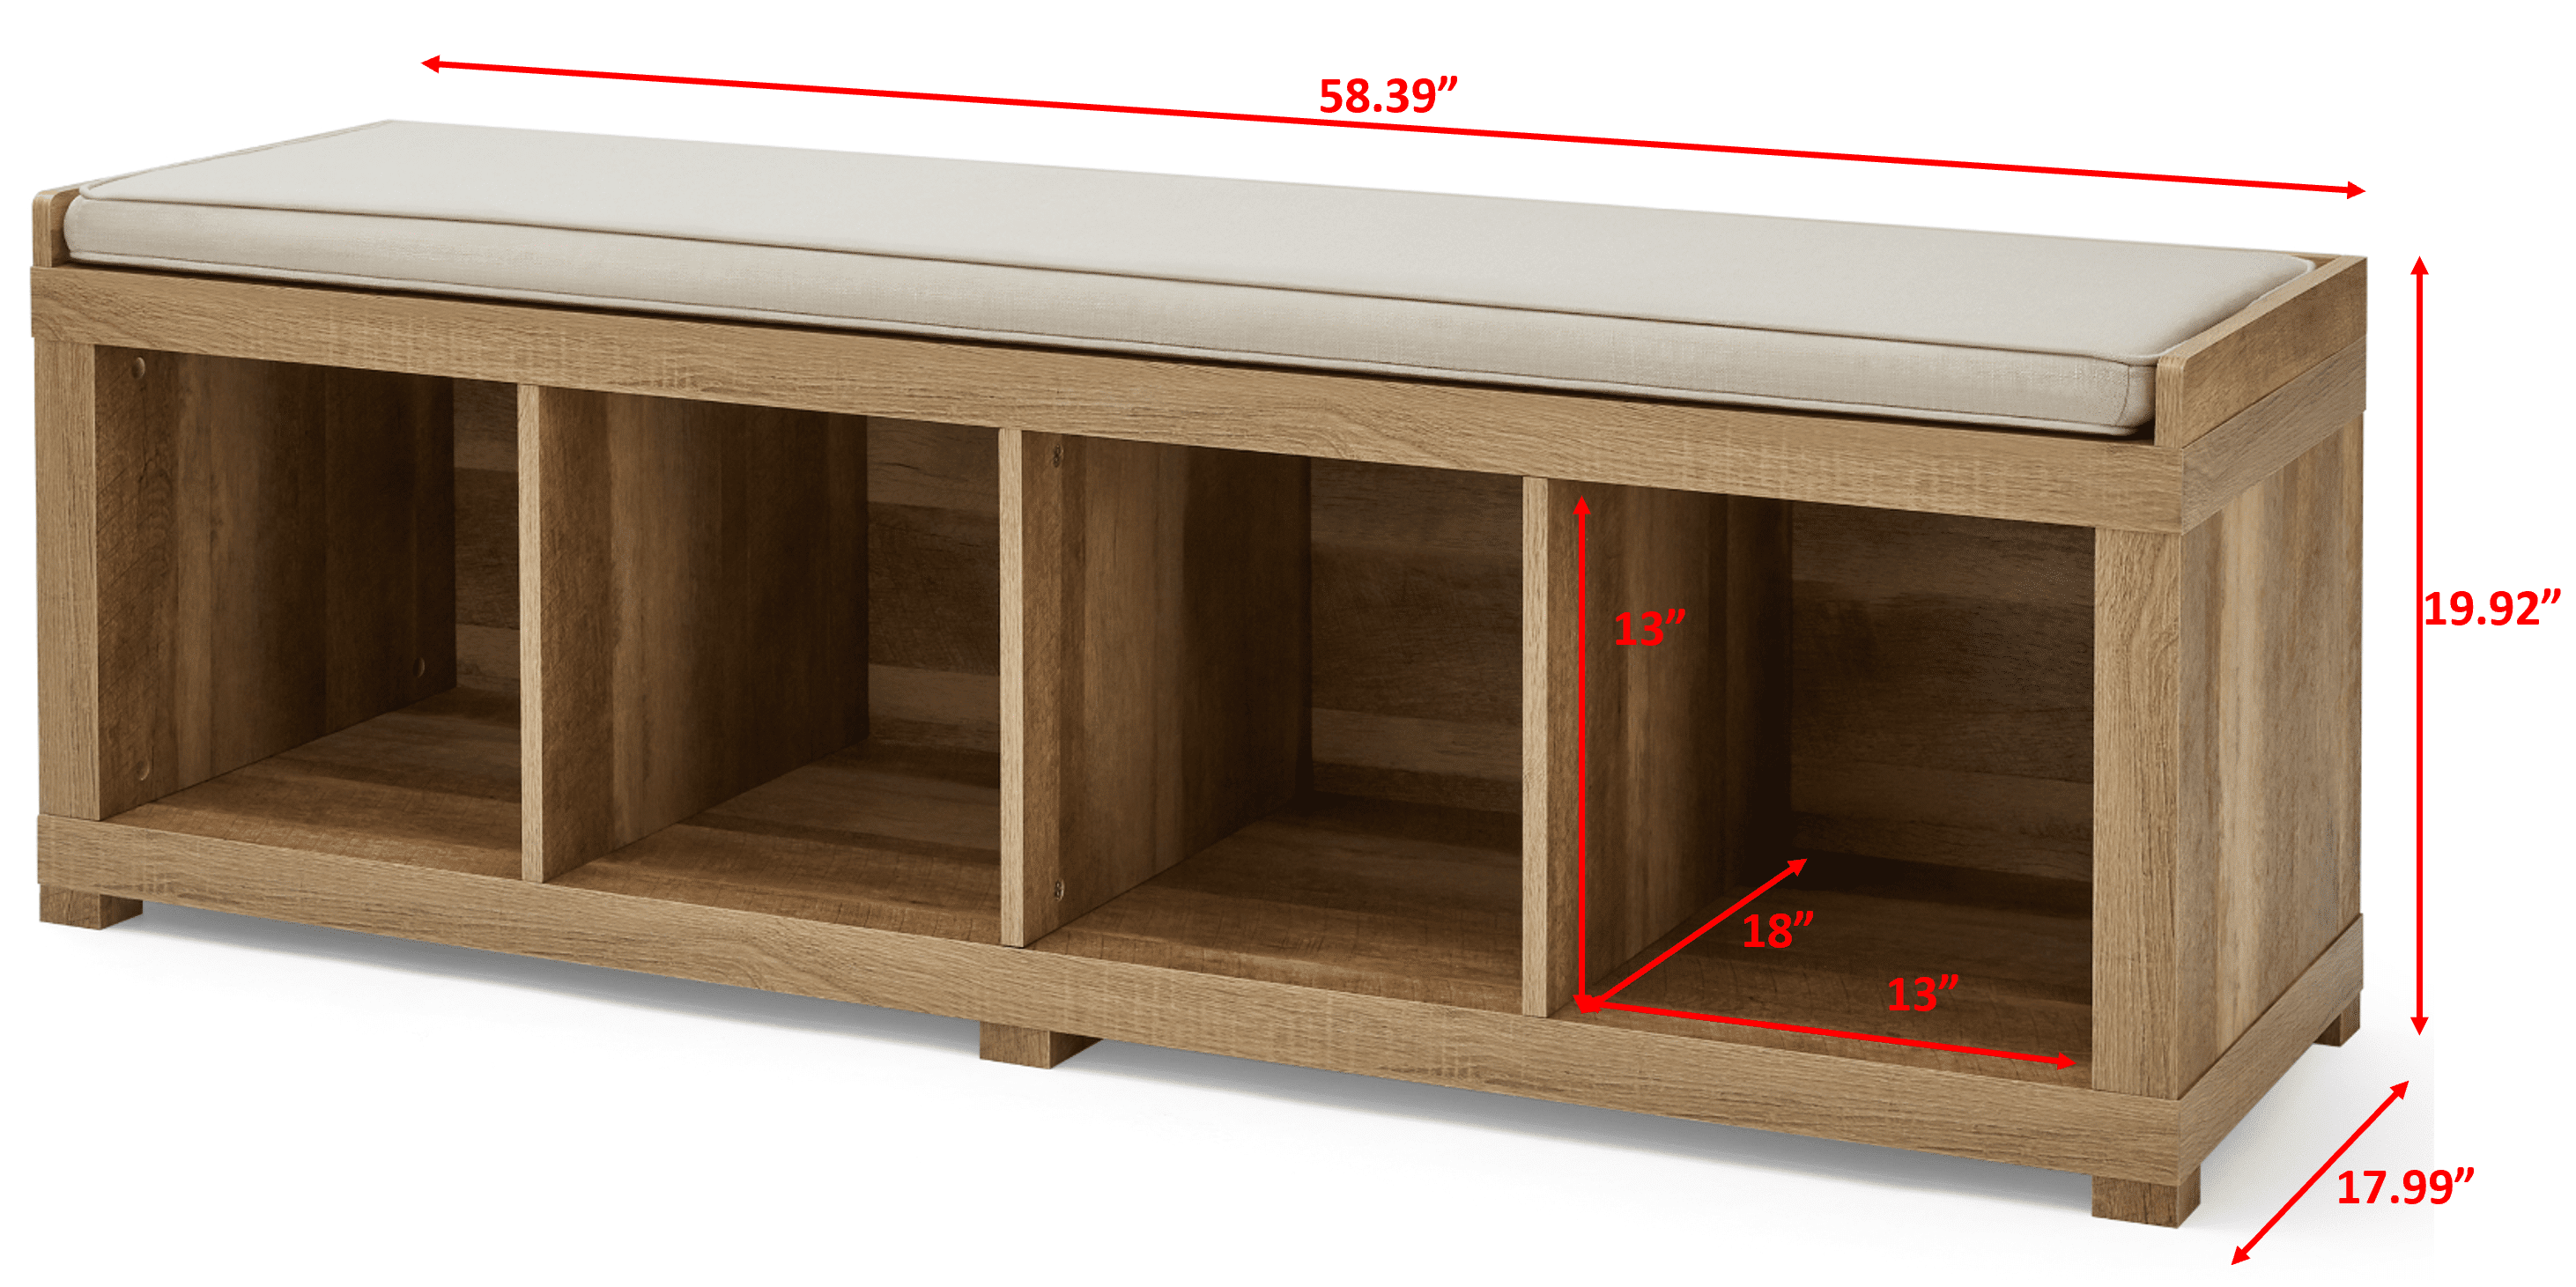 Better Homes & Gardens 4-Cube Storage Bench, Weathered - 3